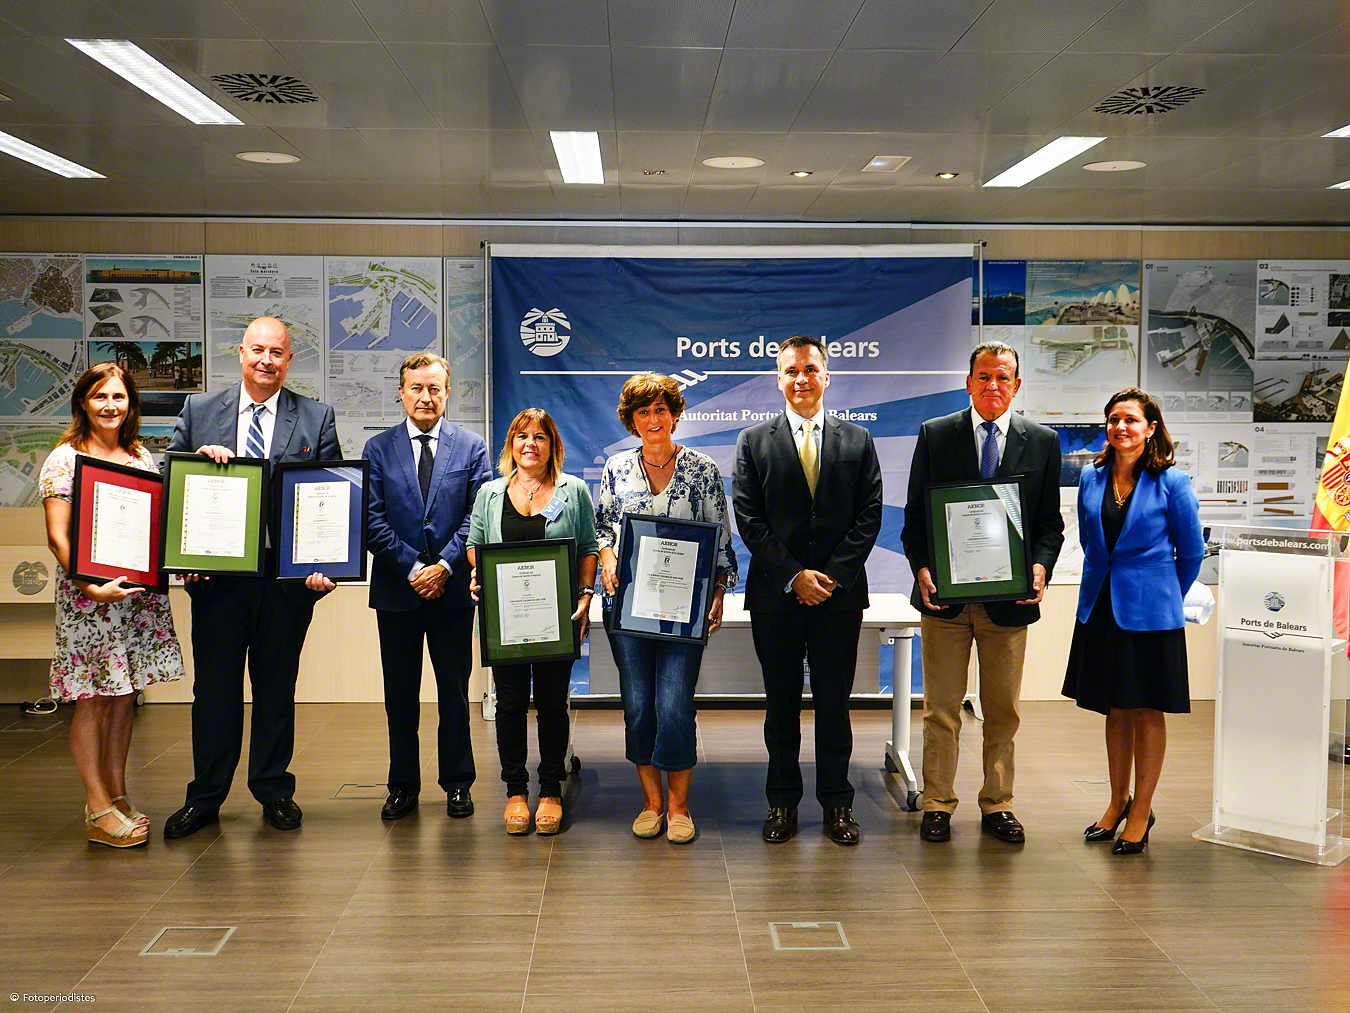 ALCUDIAMAR, COLONIA SANT PERE YACHT CLUB AND FORNELLS YACHT CLUB RECEIVE CERTIFICATIONS FROM AENOR FOR THEIR MANAGEMENT